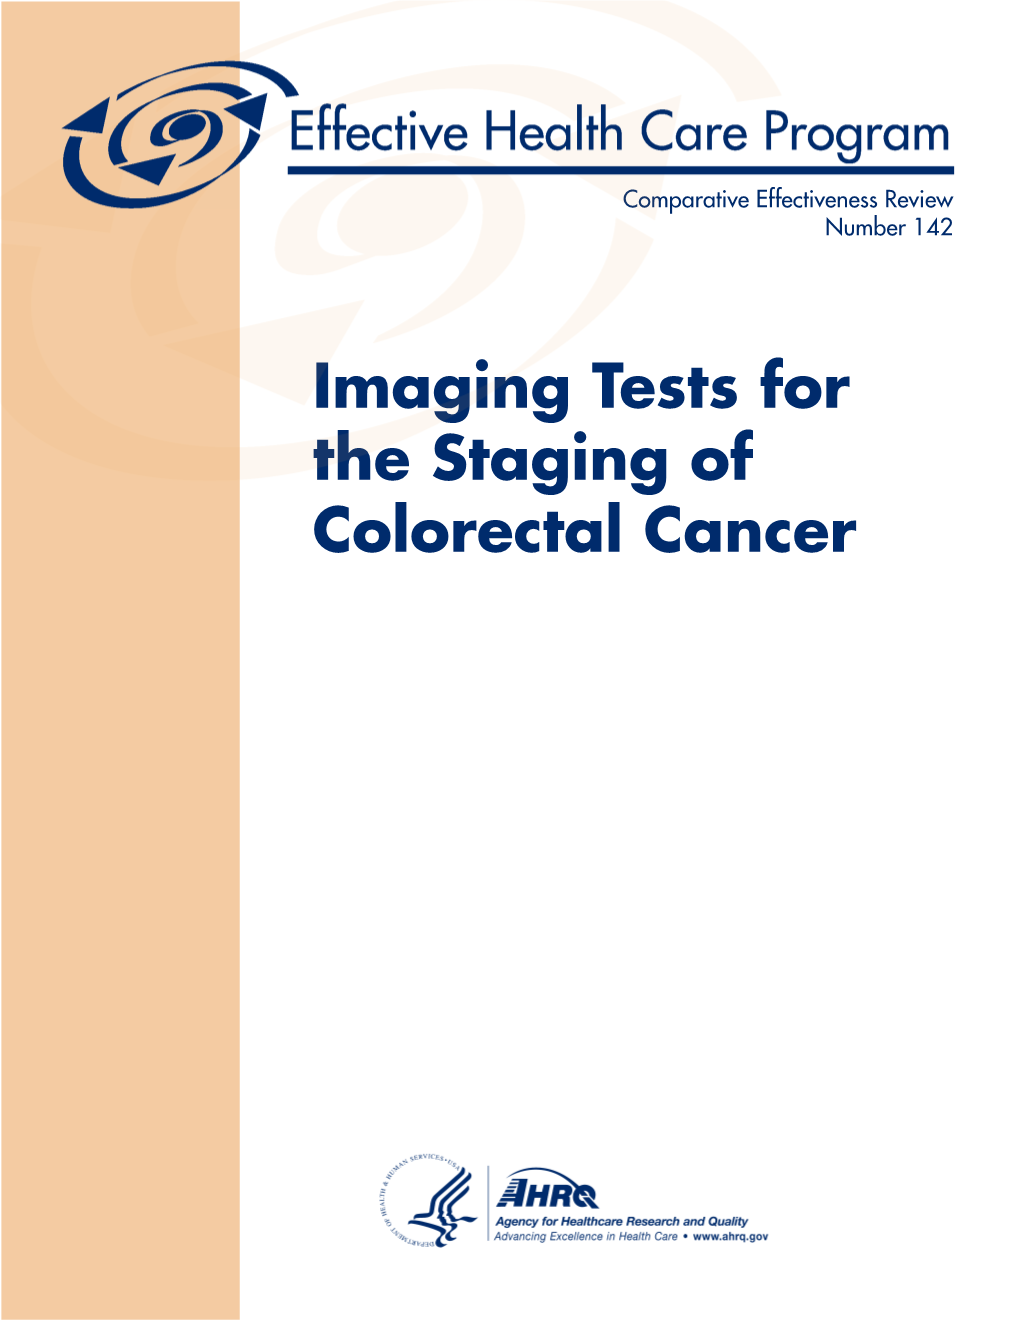 Imaging Tests for the Staging of Colorectal Cancer Comparative Effectiveness Review Number 142